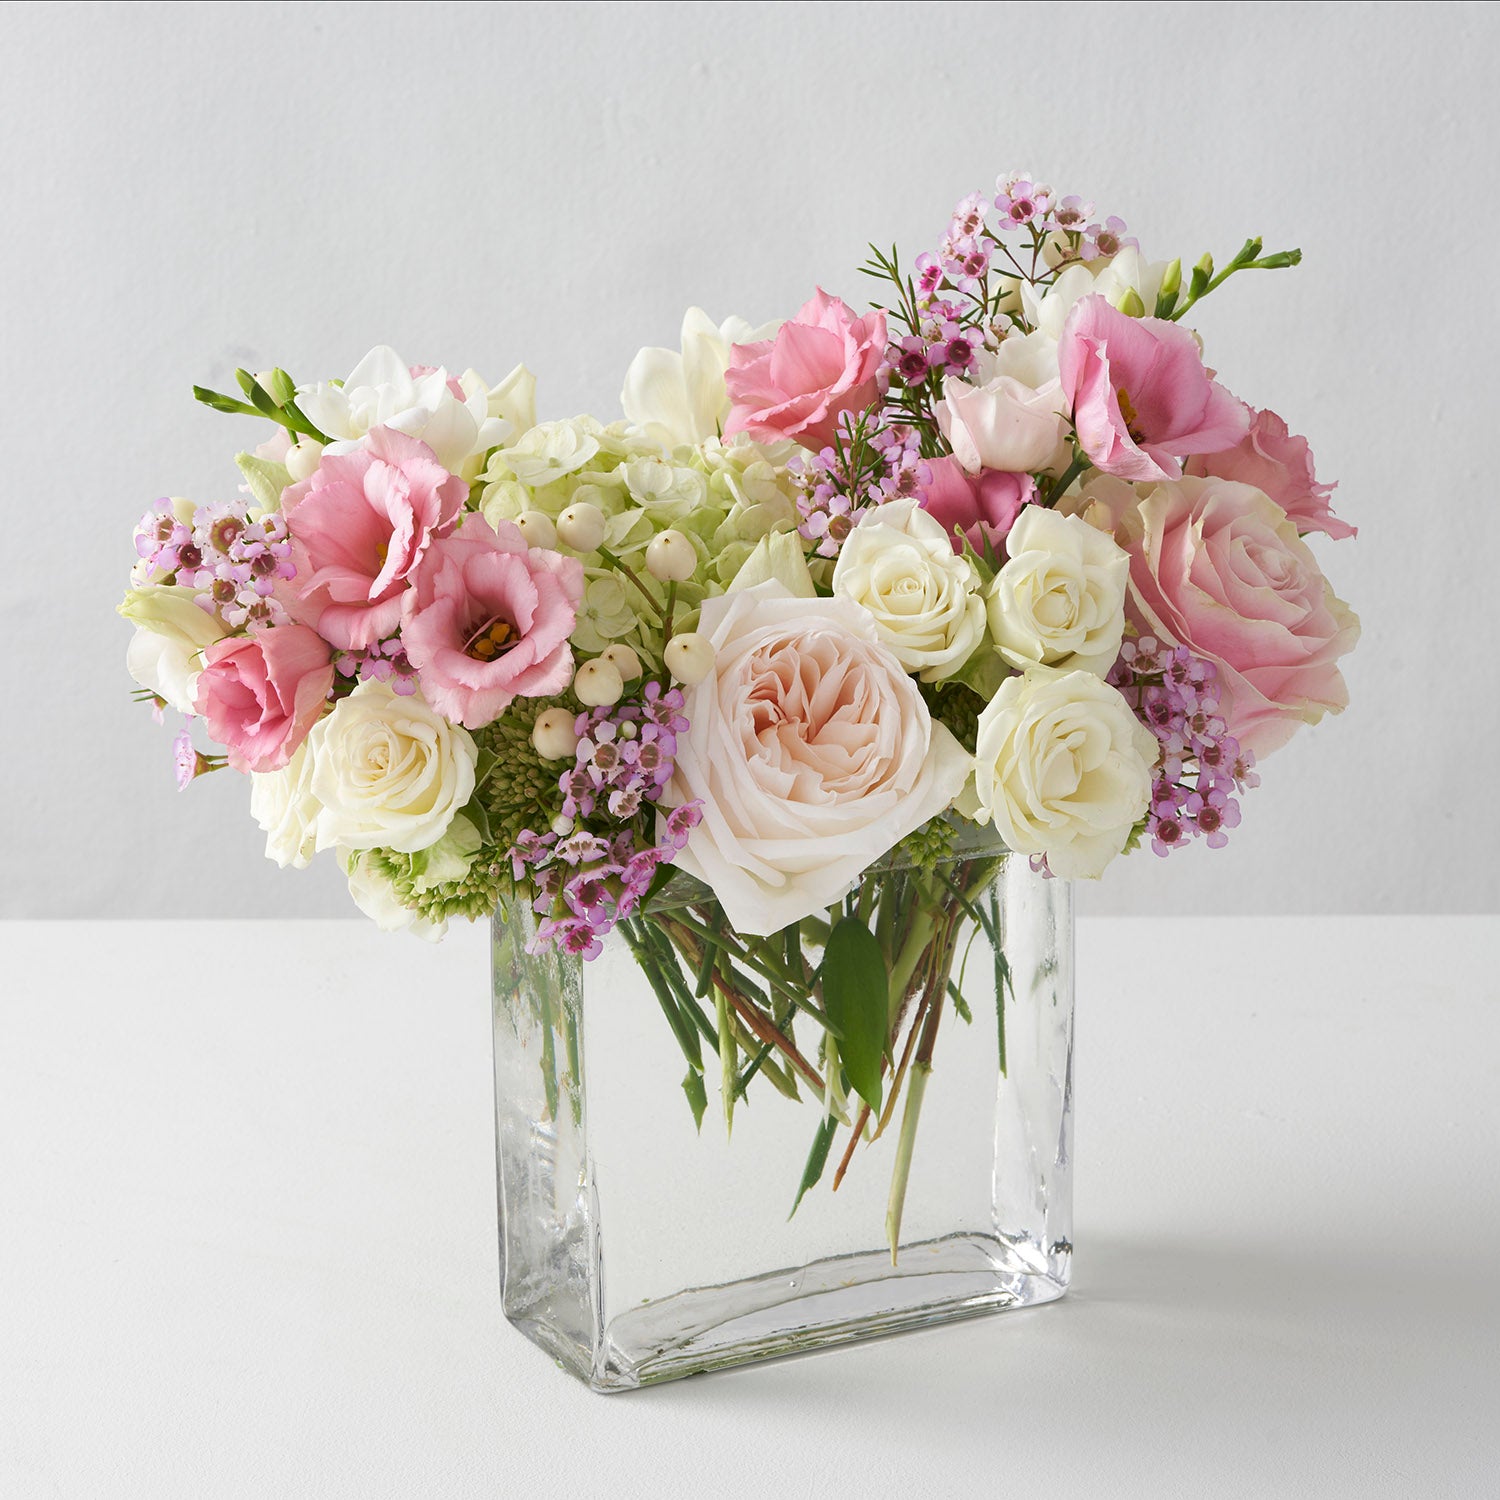 glass rectangular vase filled with O'hara roses pink Mondial roses white spray roses freesia and hydrangea on white background.